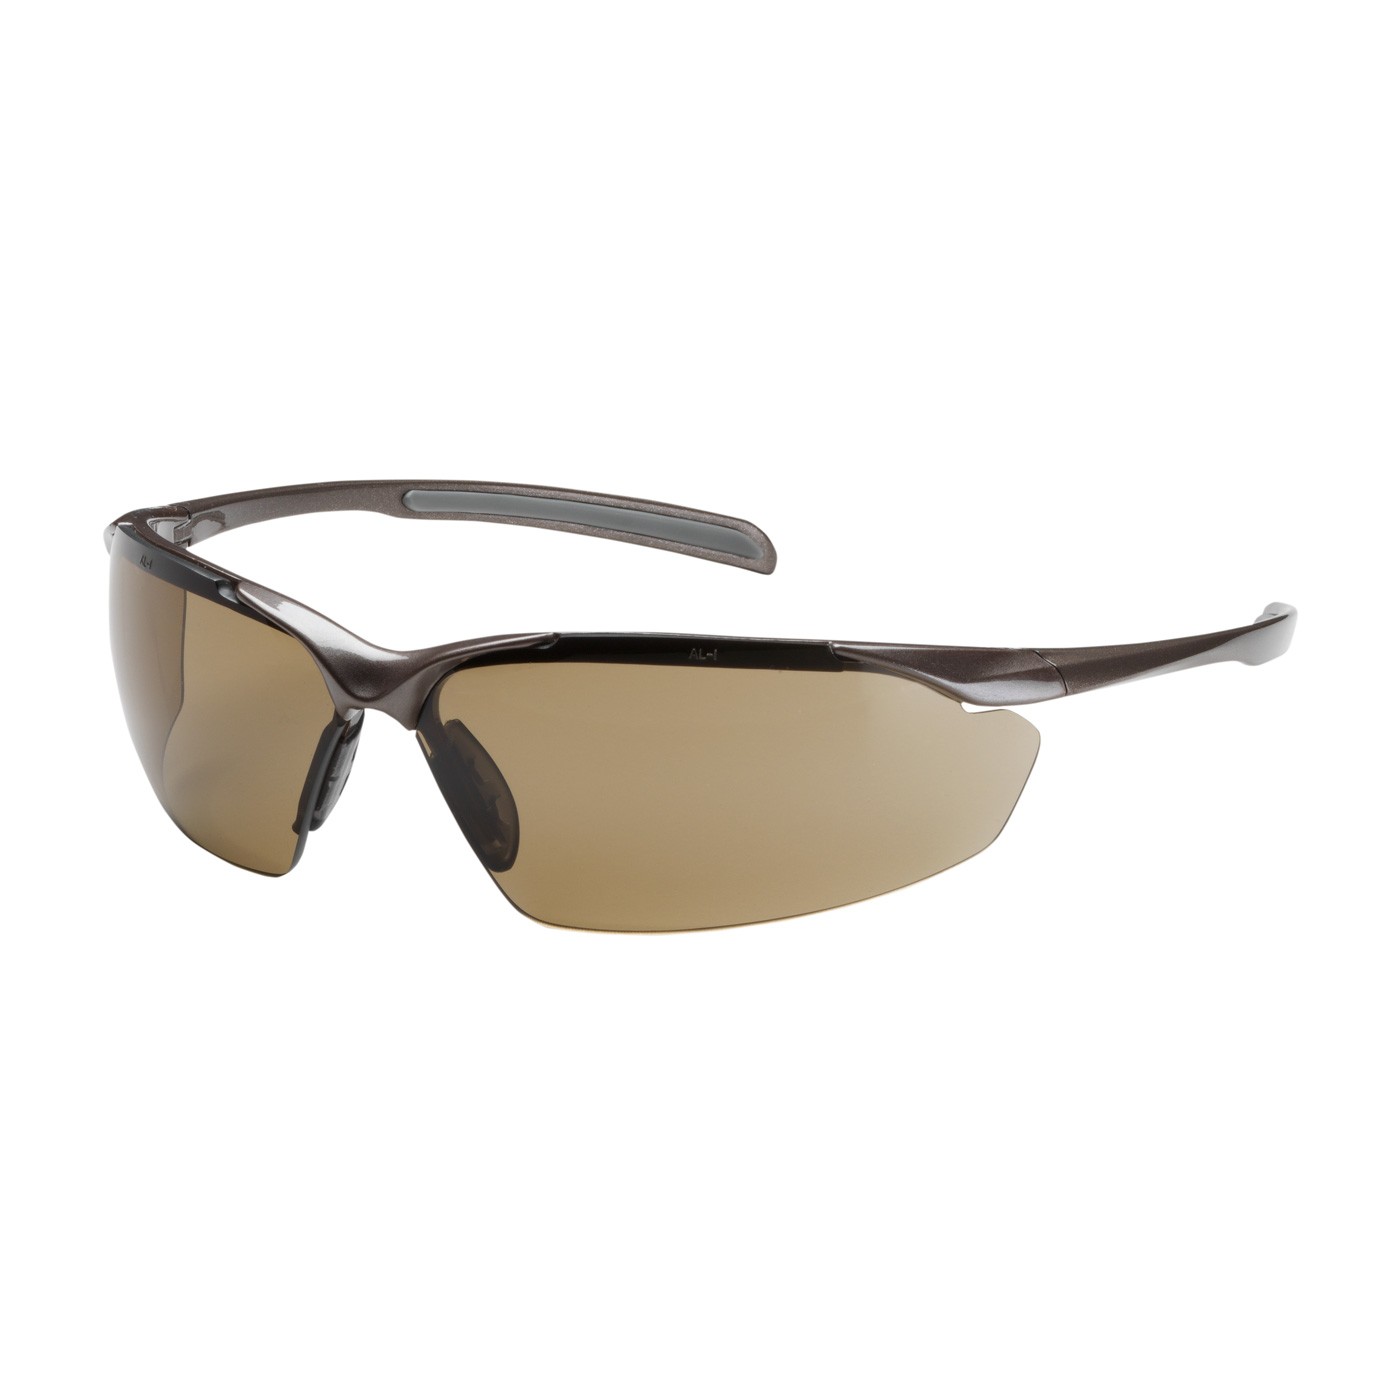 Commander™ Semi-Rimless Safety Glasses with Gloss Bronze Frame, Brown Lens and Anti-Scratch / Anti-Fog Coating  (#250-33-1024)